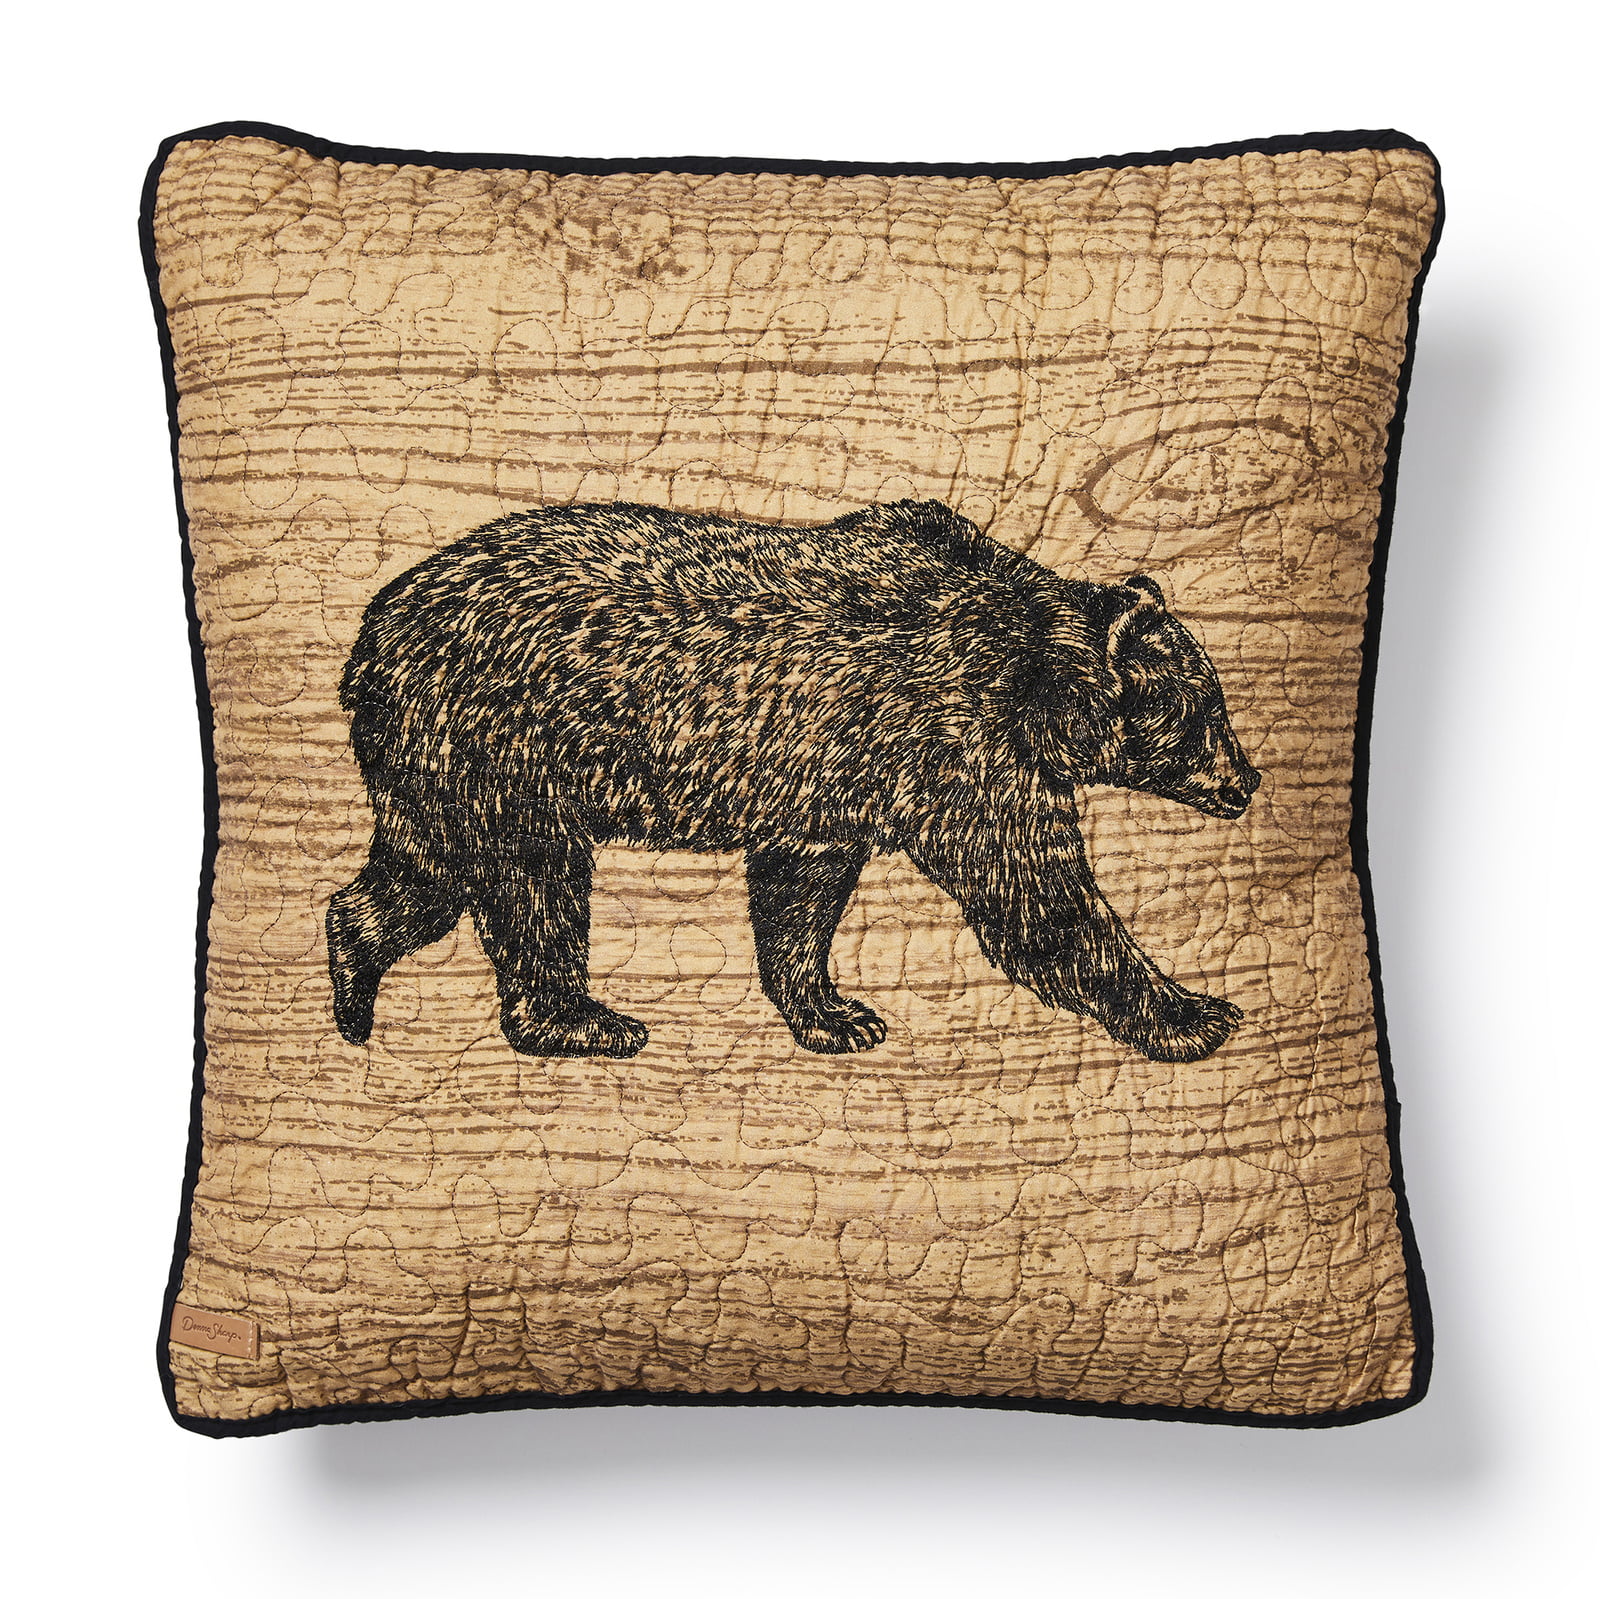 75415 18 X 18 In. Oakland Cp Paw Decorative Pillow, Tan & Black